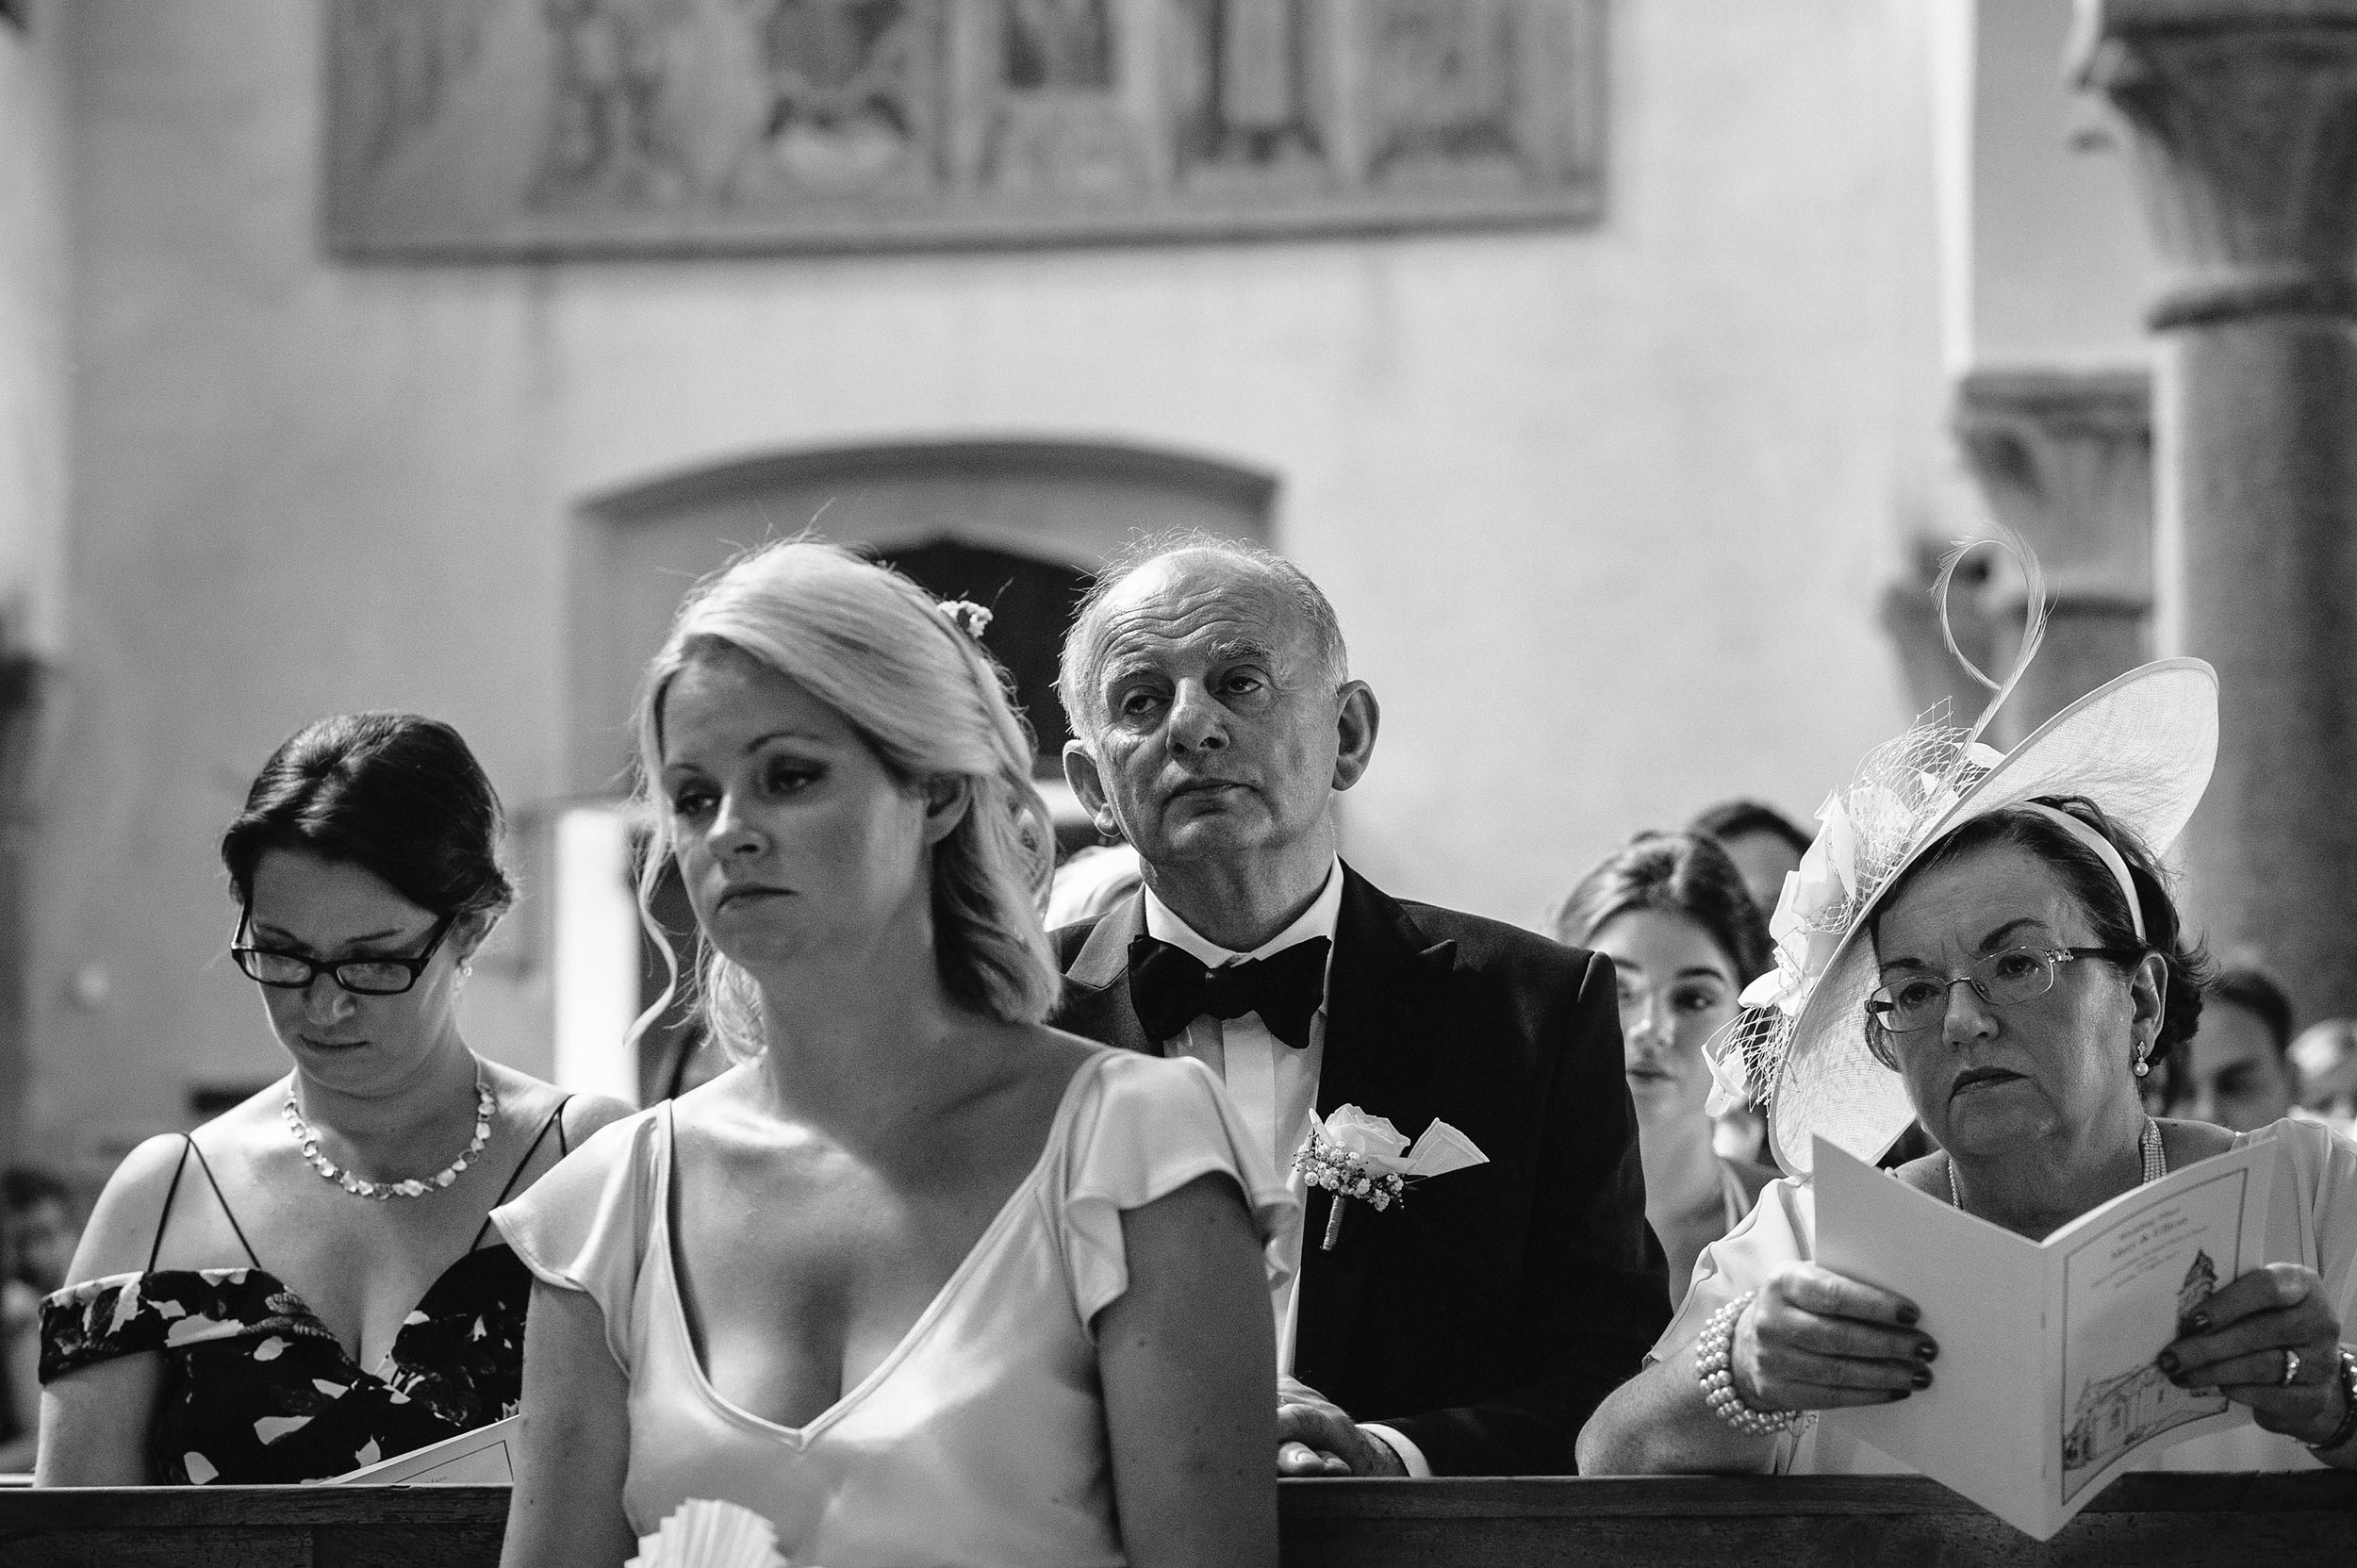 bored-guests-ceremony-black-and-white-wedding-photography.jpg